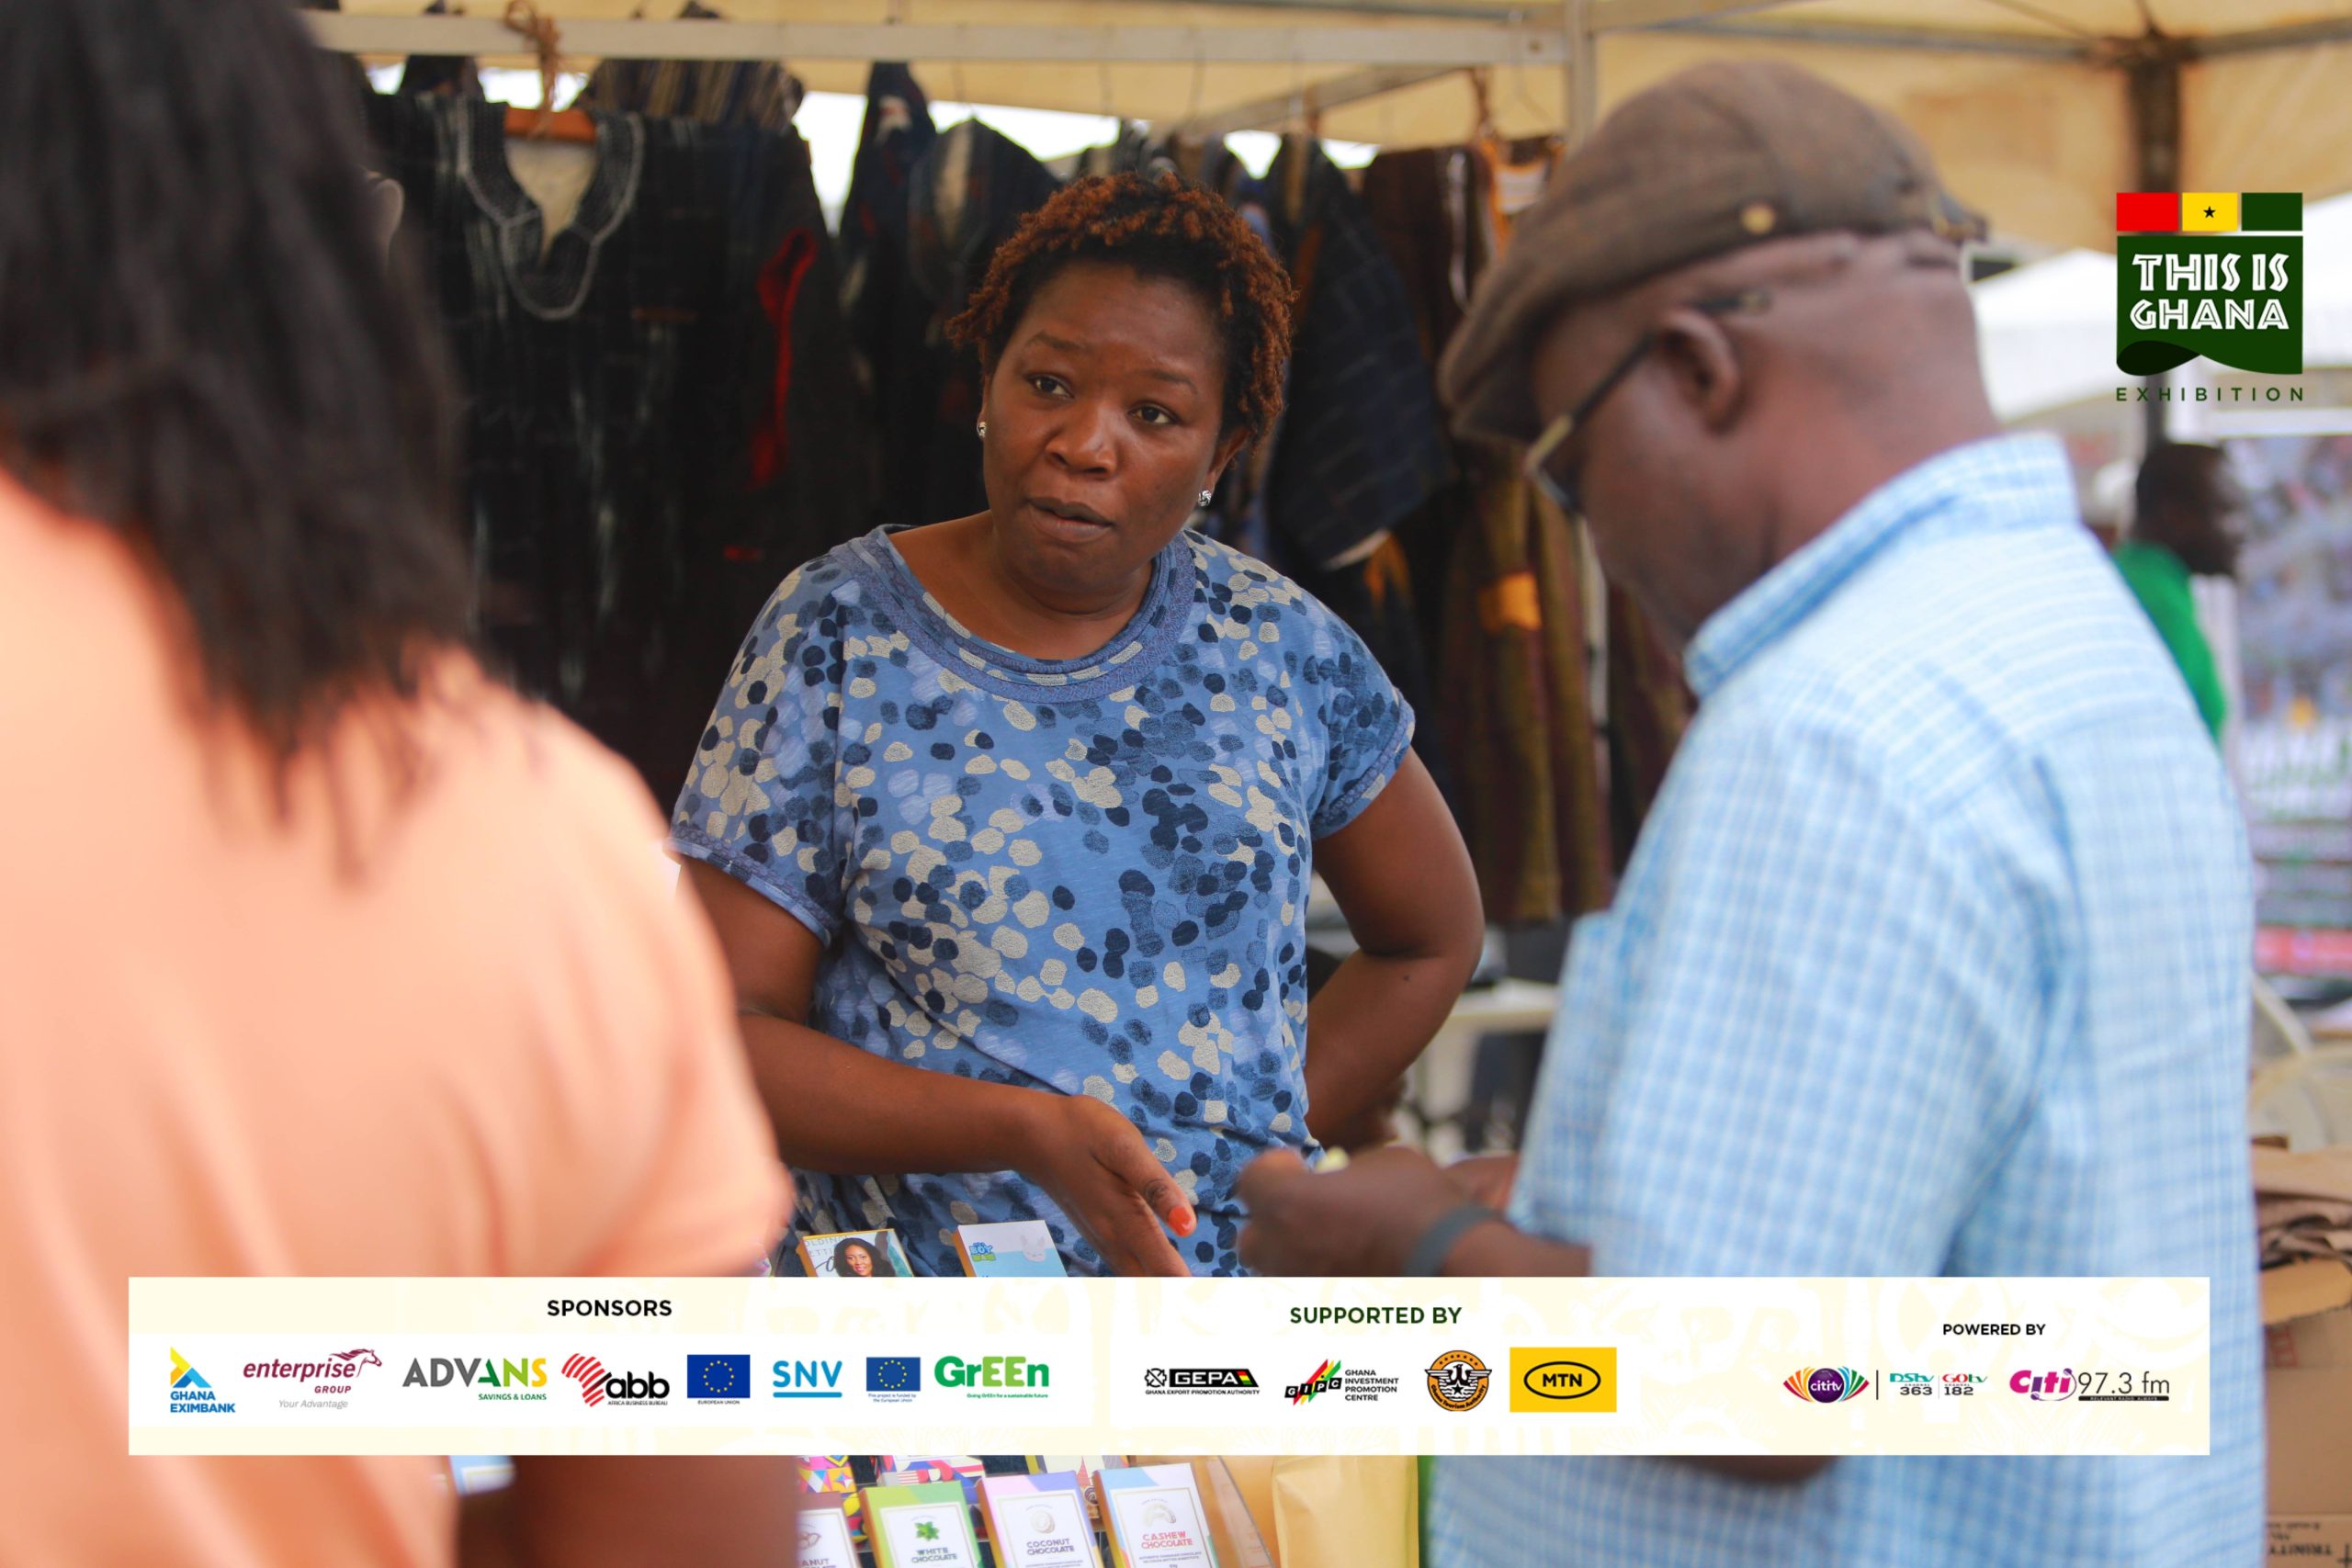 Day one of Citi FM/Citi TV’s ‘This is Ghana Exhibition’ underway